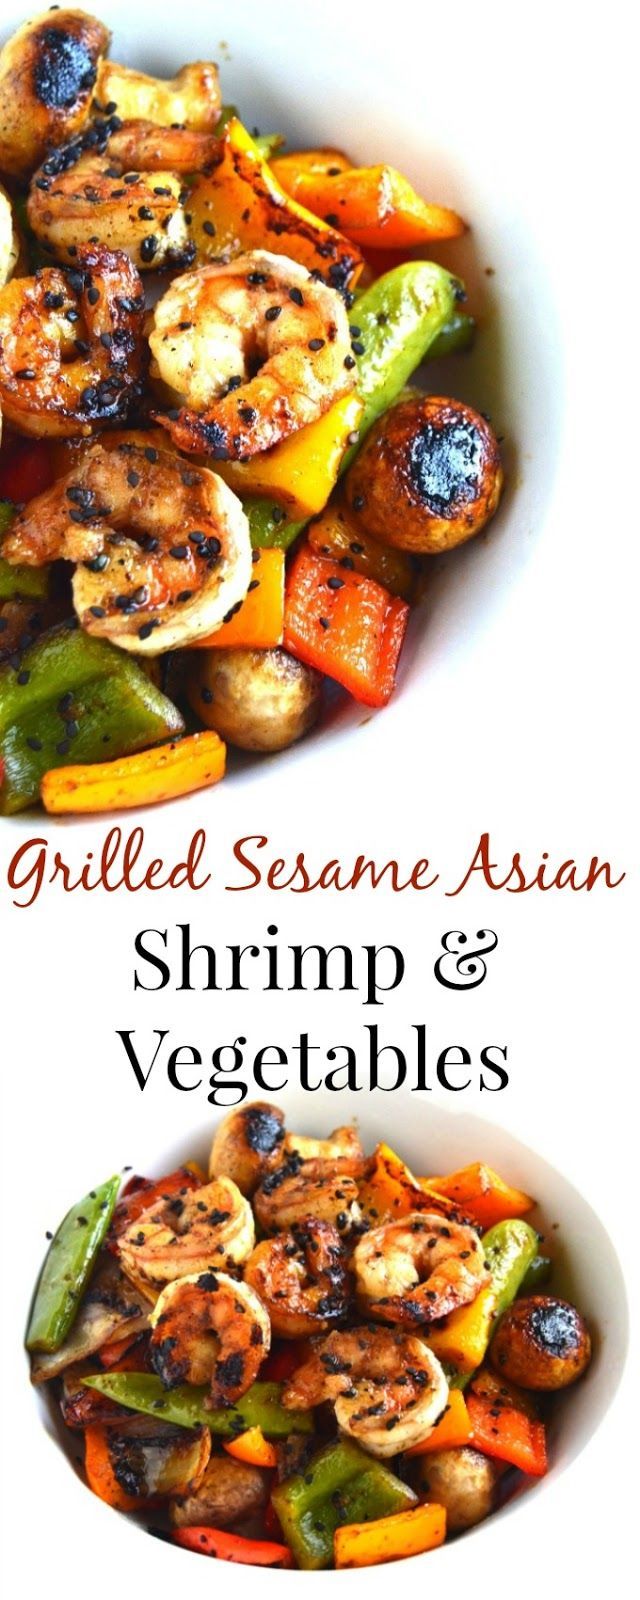 Grilled Sesame Asian Shrimp and Vegetables takes 20 minutes to make and is marinated in a delicious ta